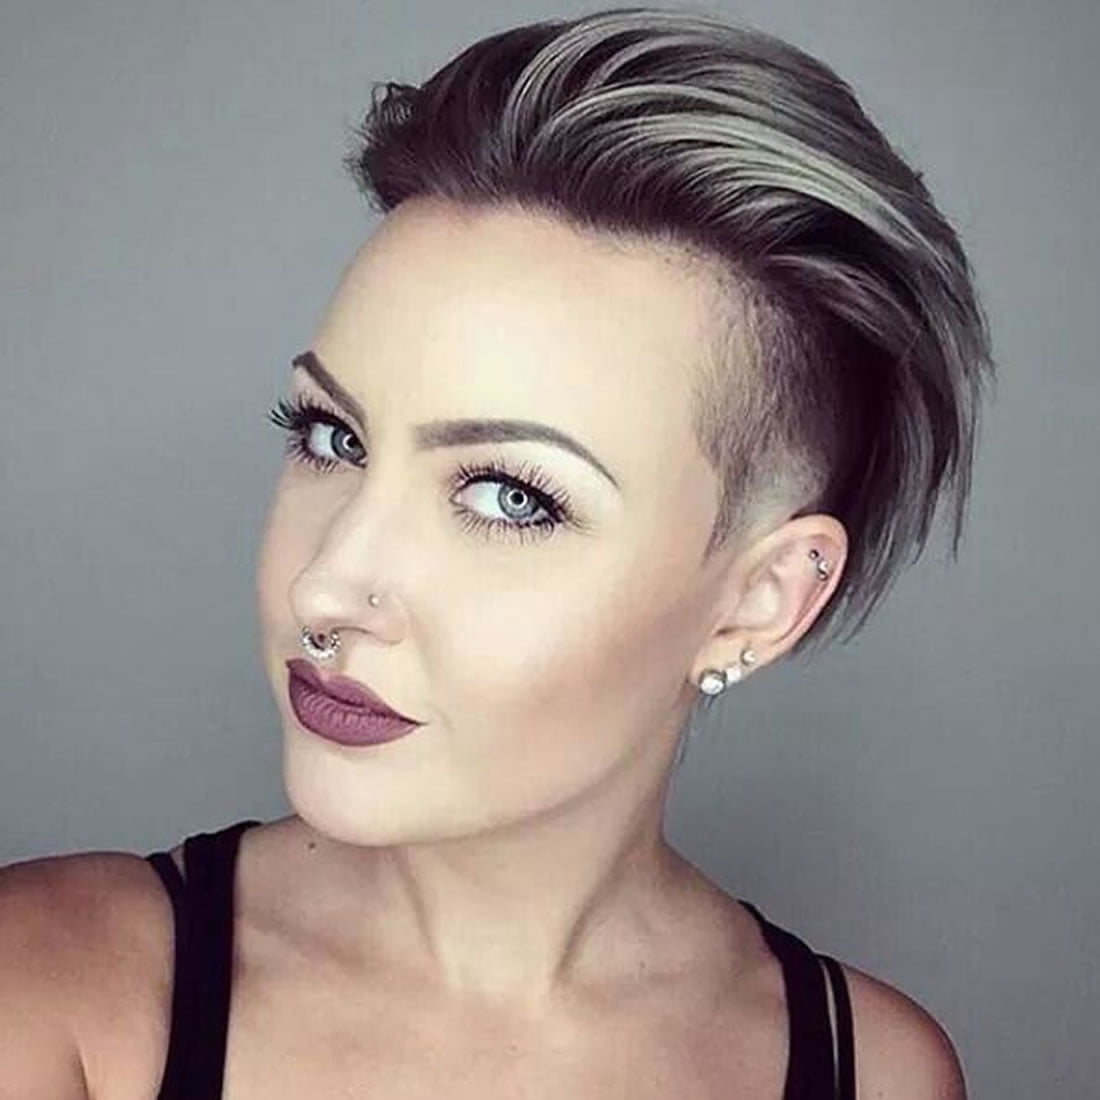 25 Glowing Undercut Short Hairstyles for Women – Page 2 – HAIRSTYLES